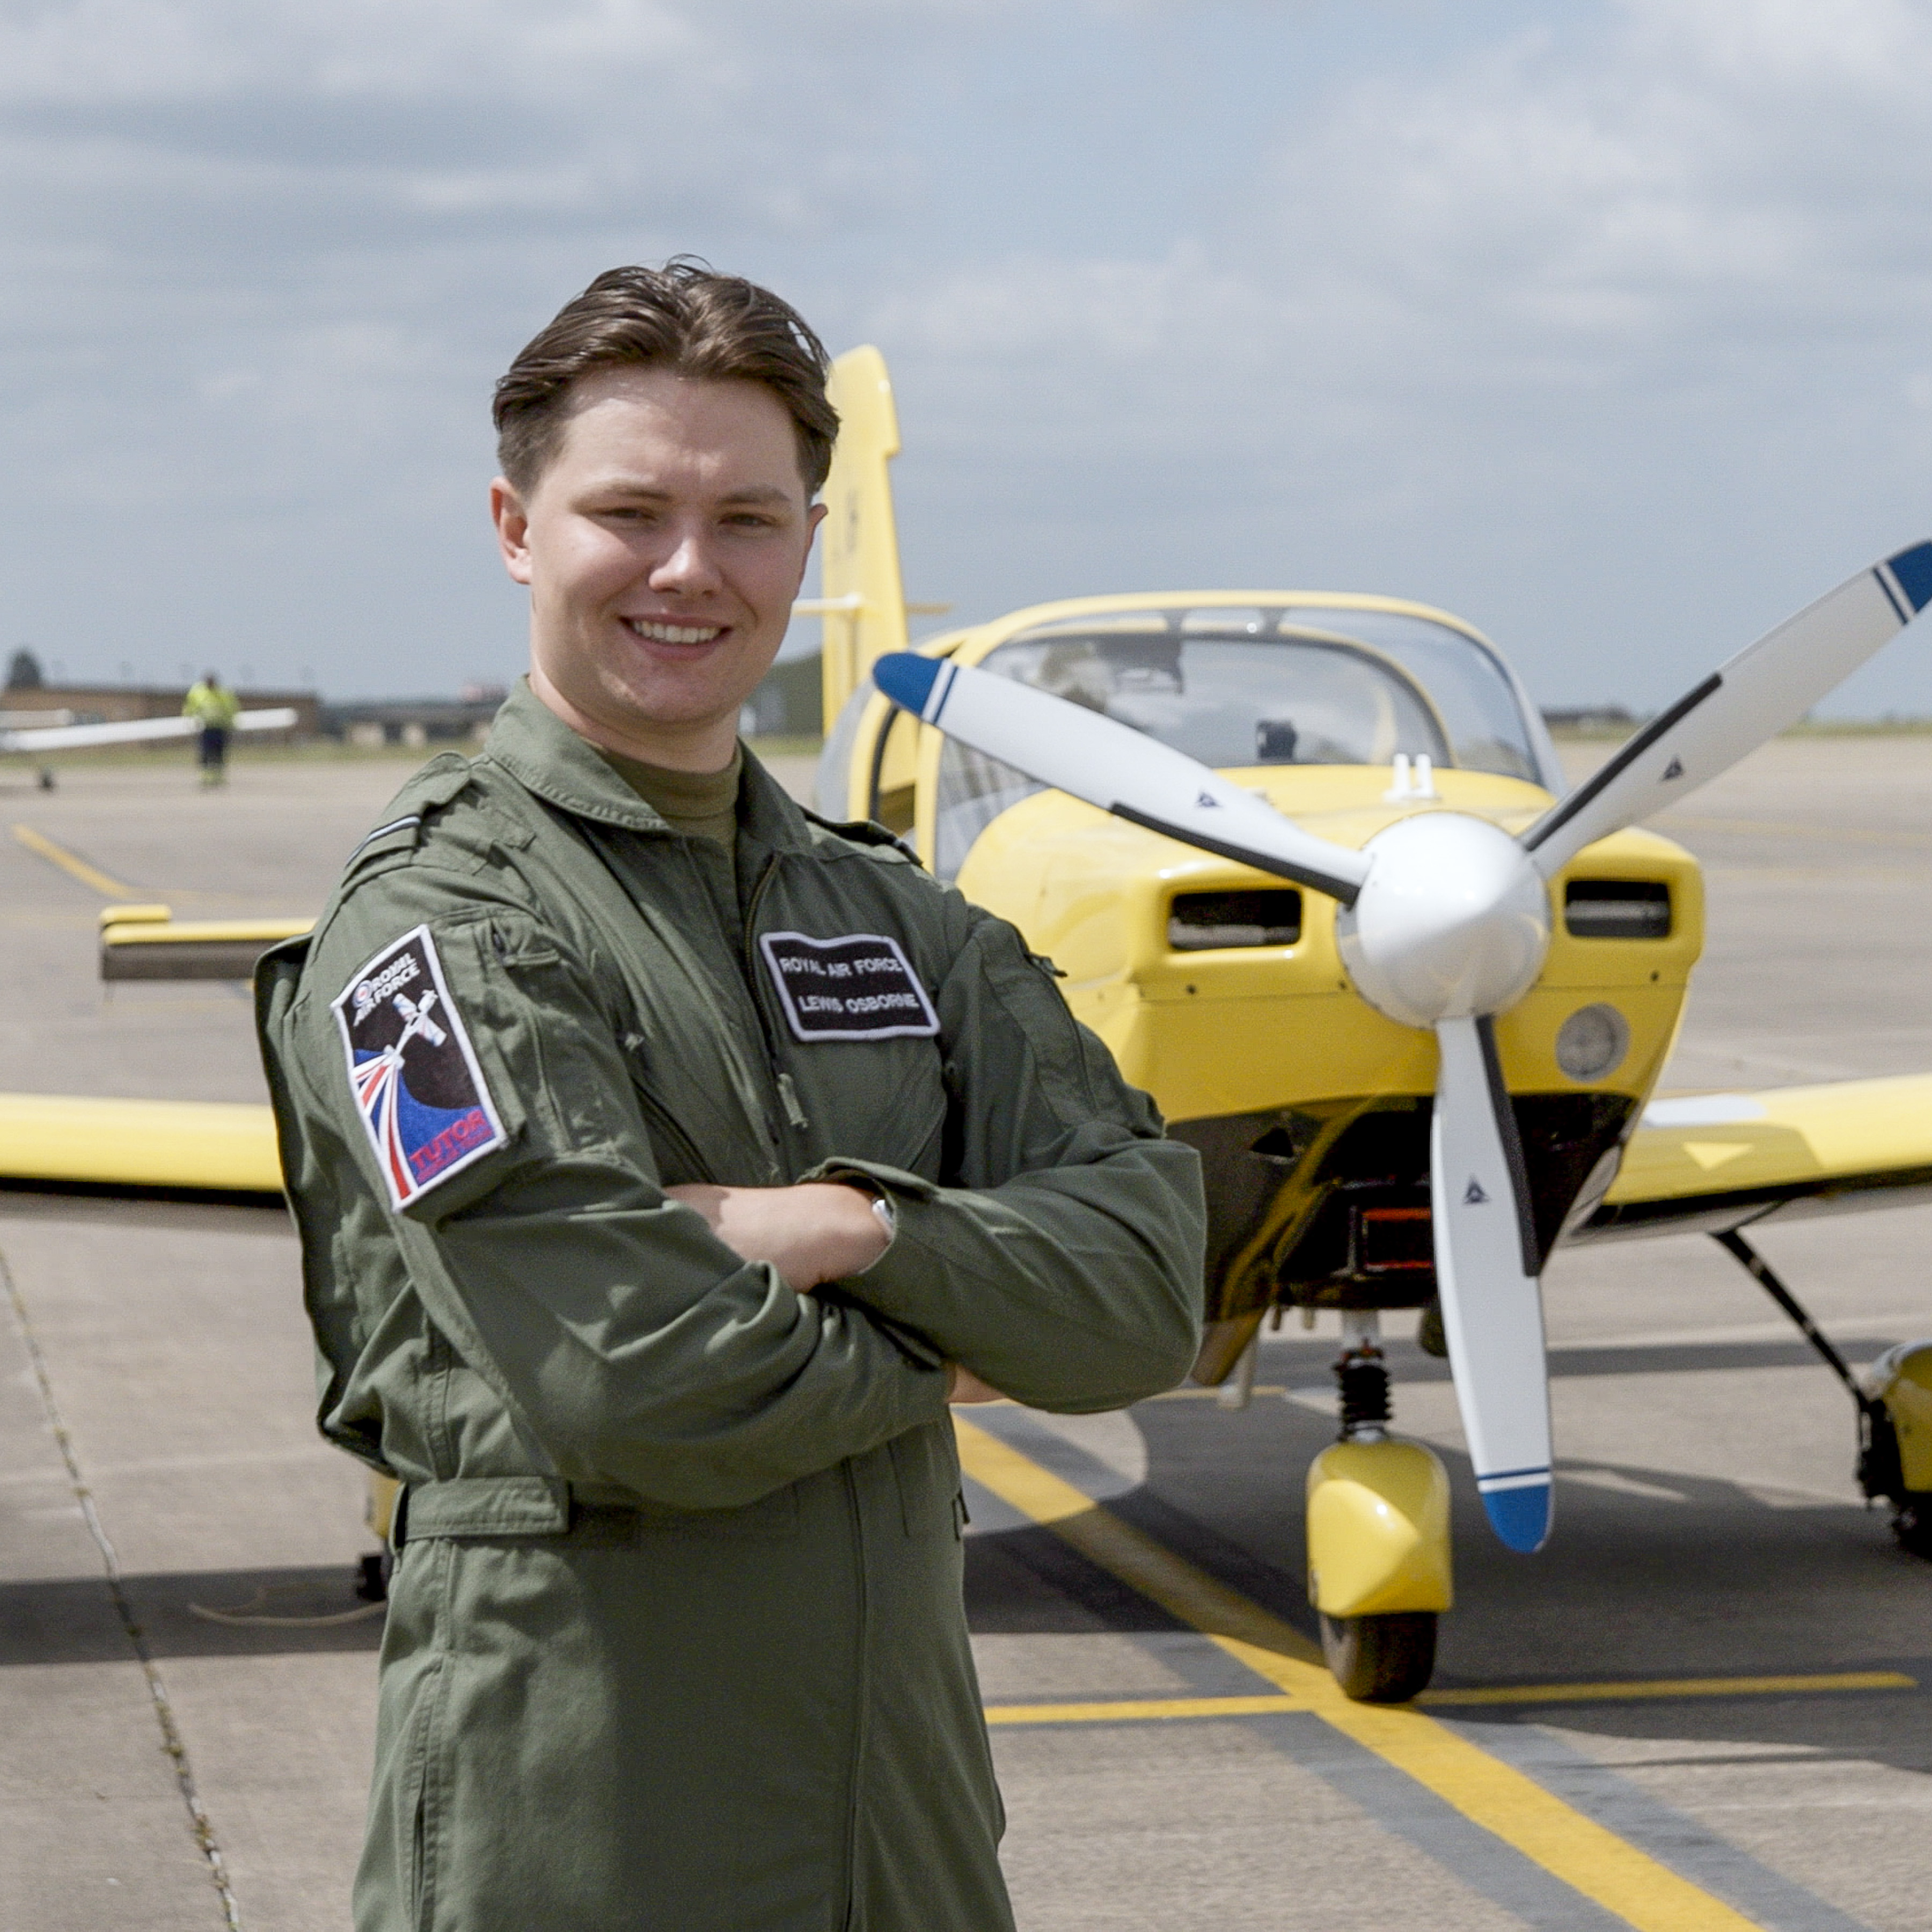 Flying Officer Osbourne in front of a yellow light aircraft